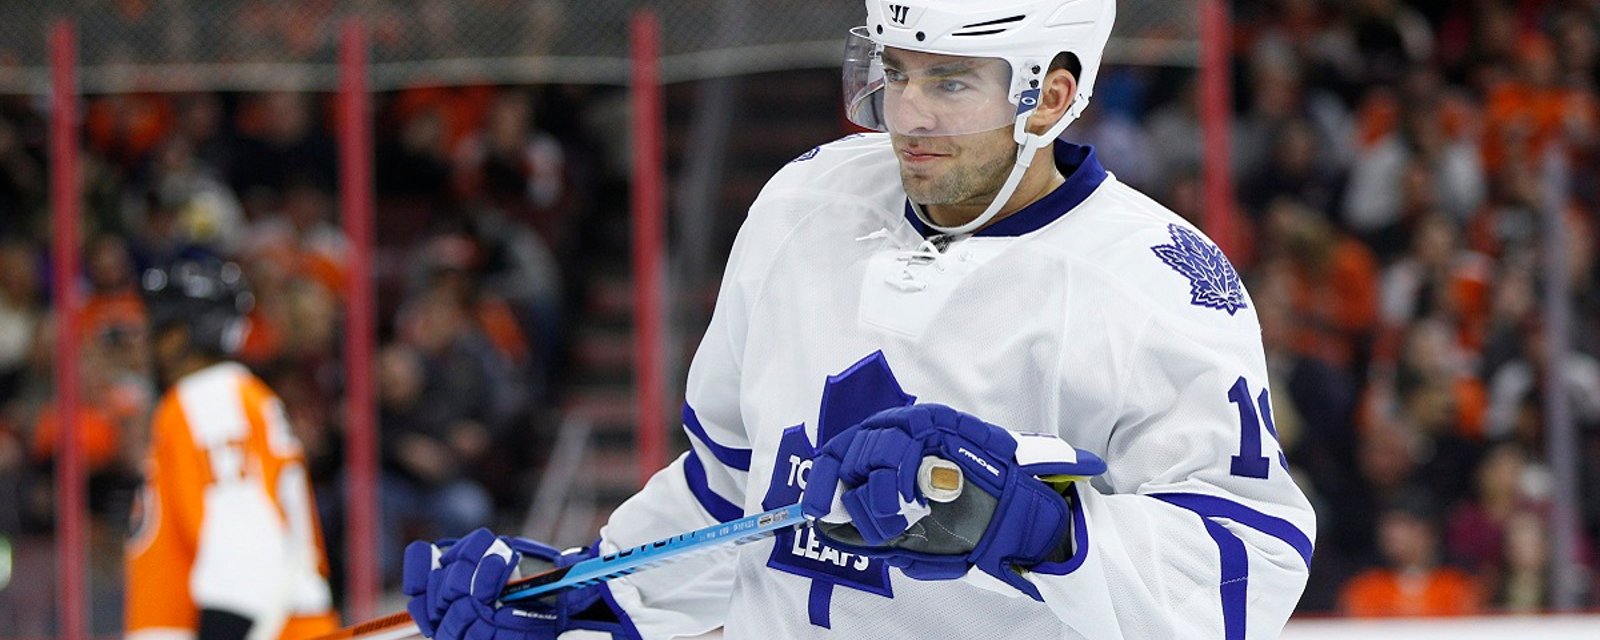 Update of Joffrey Lupul's potential grievance with the Maple Leafs.